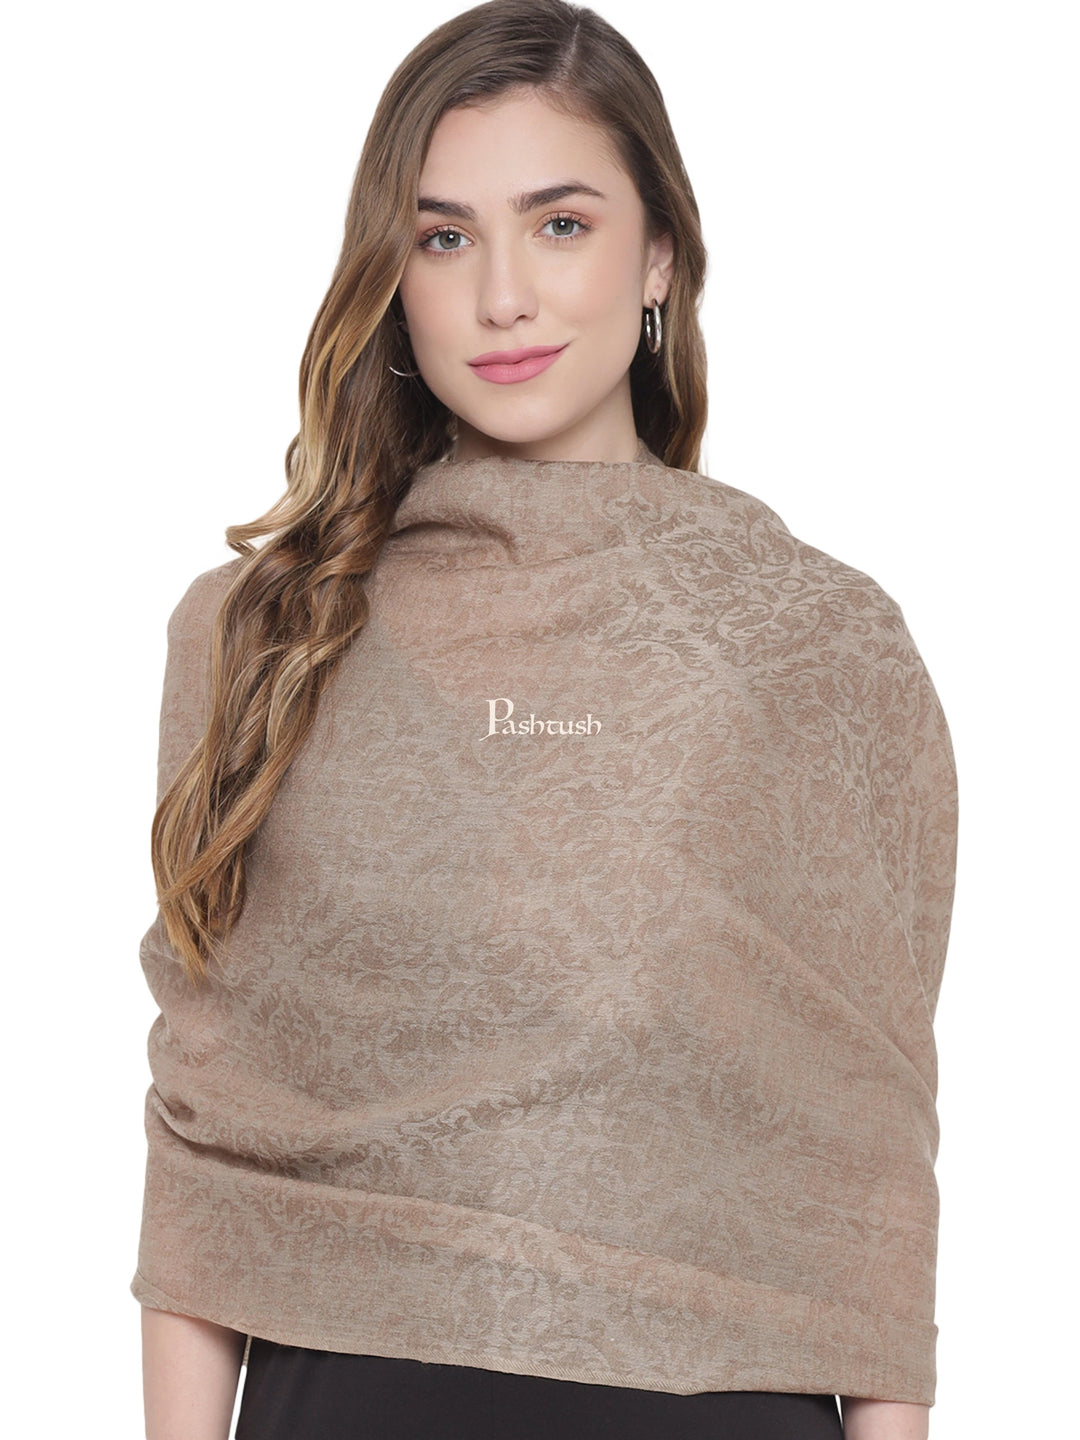 Pashtush India Womens Stoles and Scarves Scarf Pashtush Womens Fine Wool Stole, Persian Design, Soft and Warm, Natural Beige